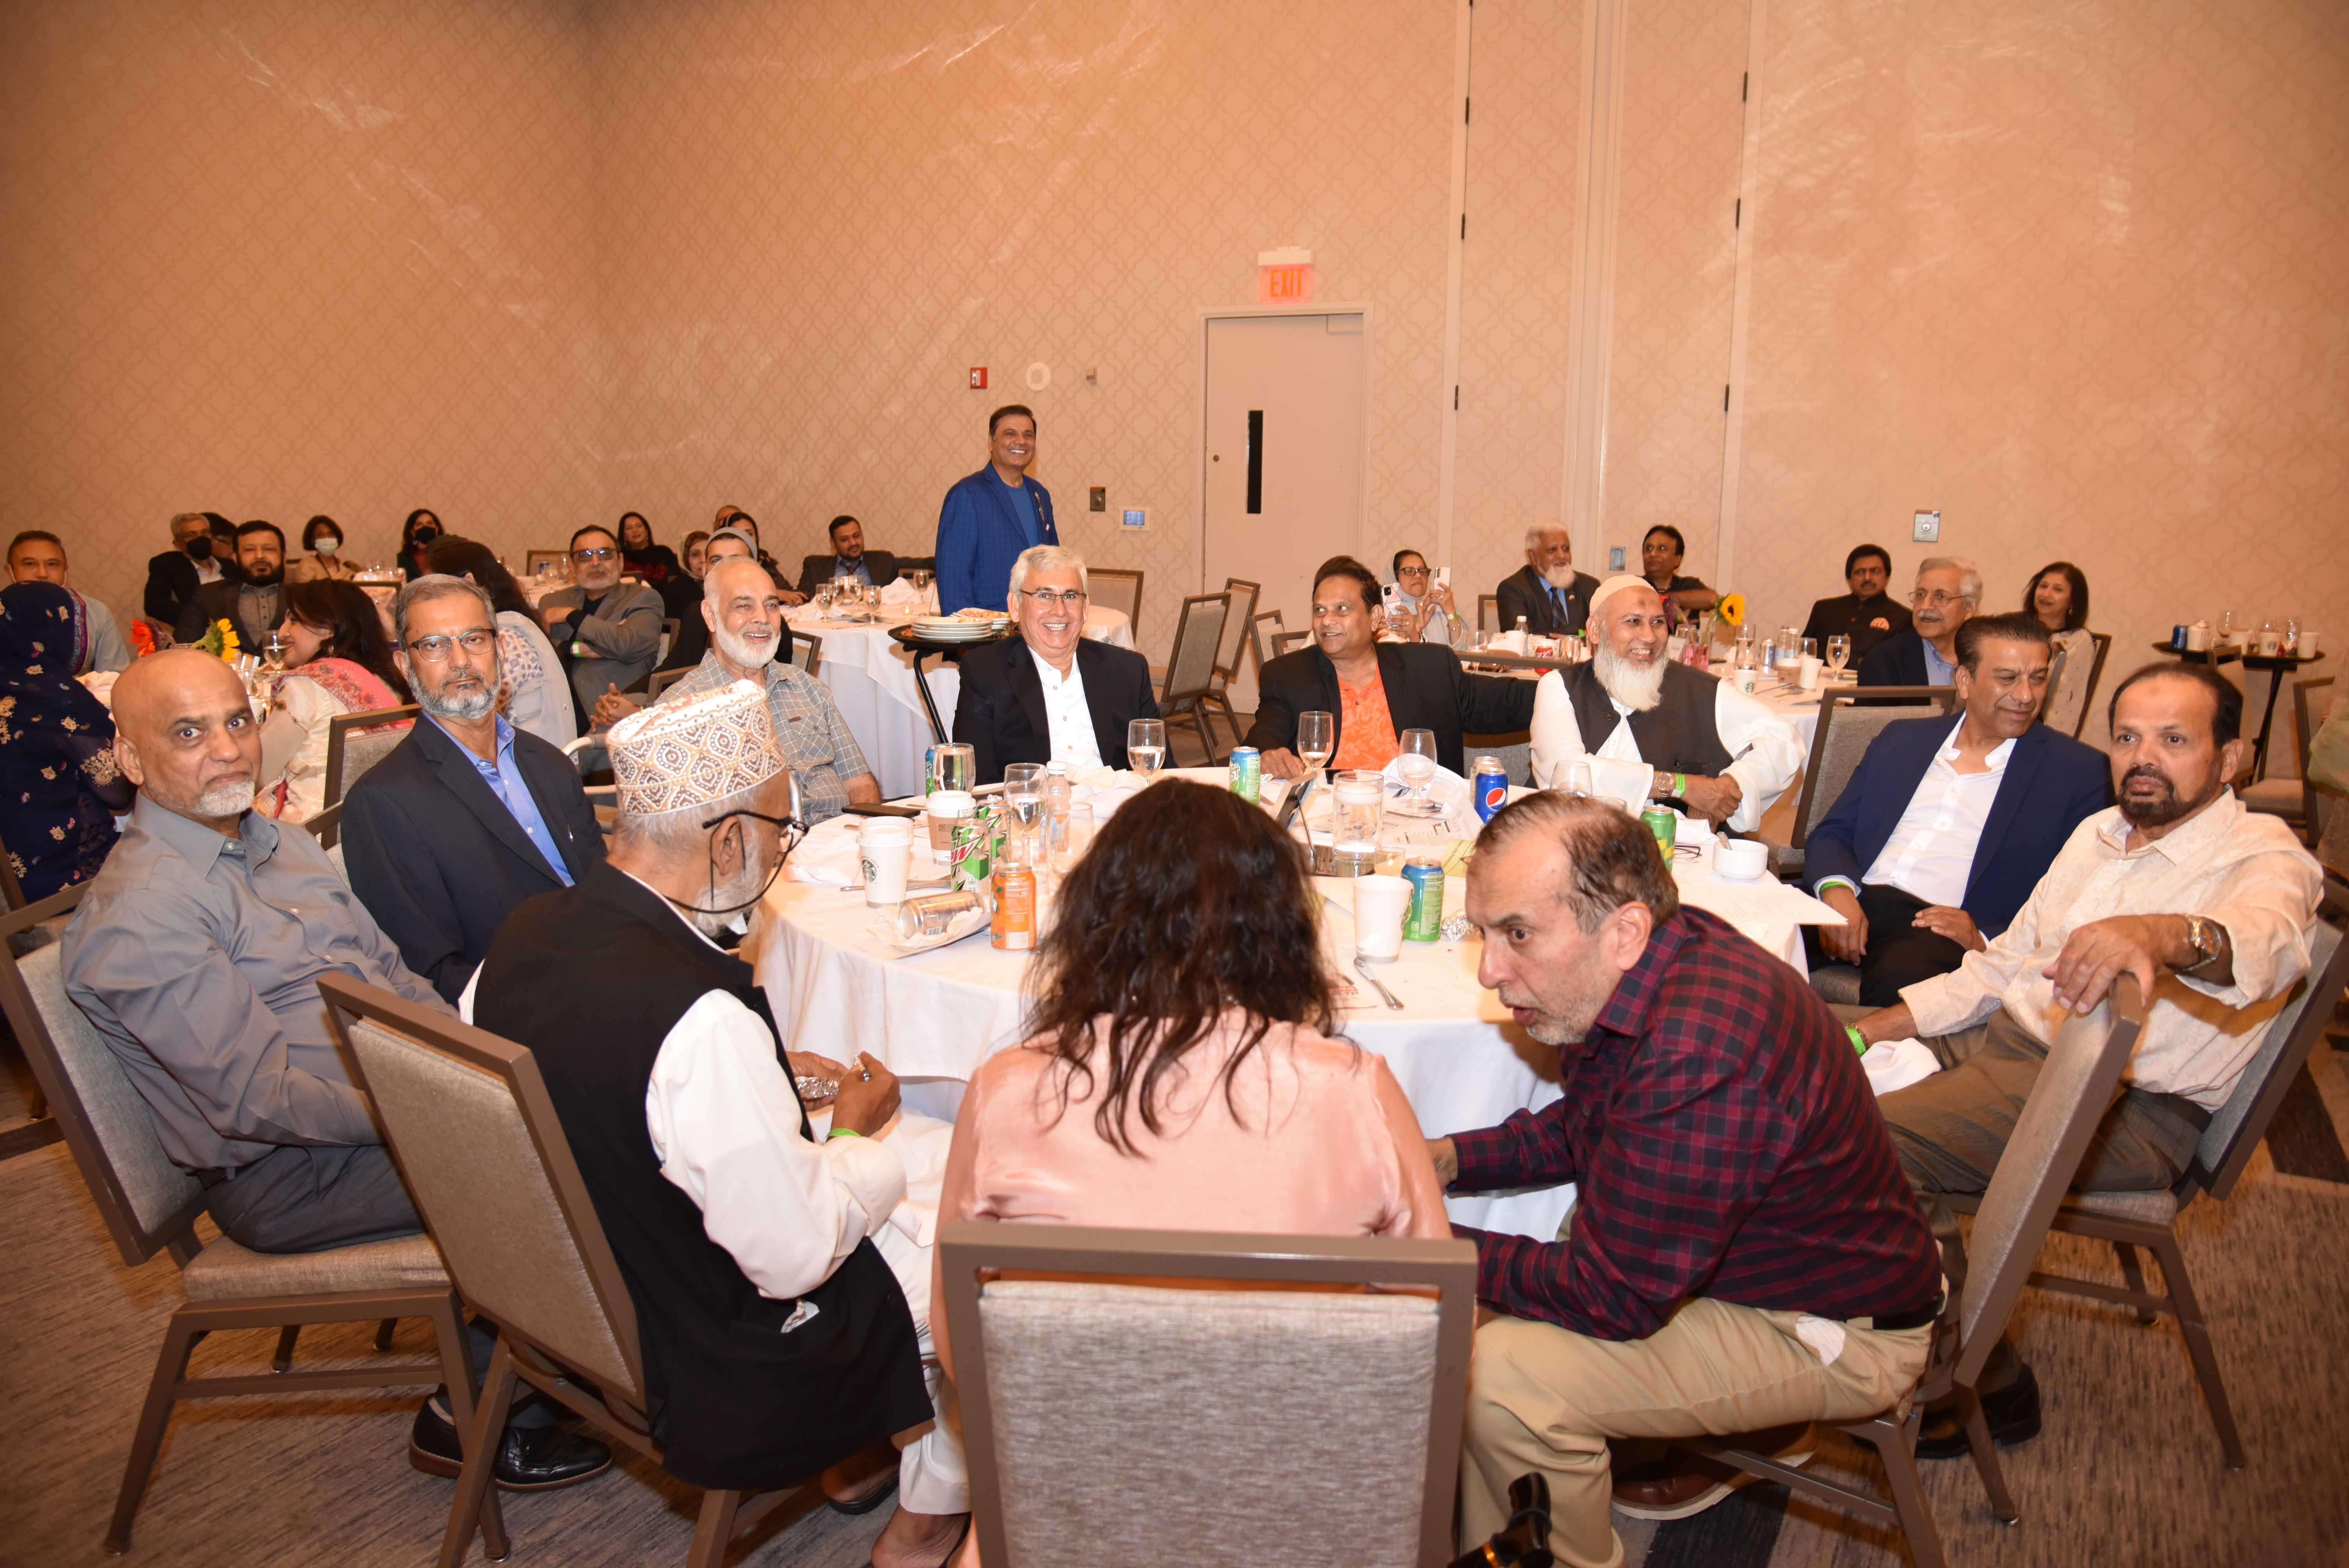 PPS  2022 Annual Meeting A Huge Success